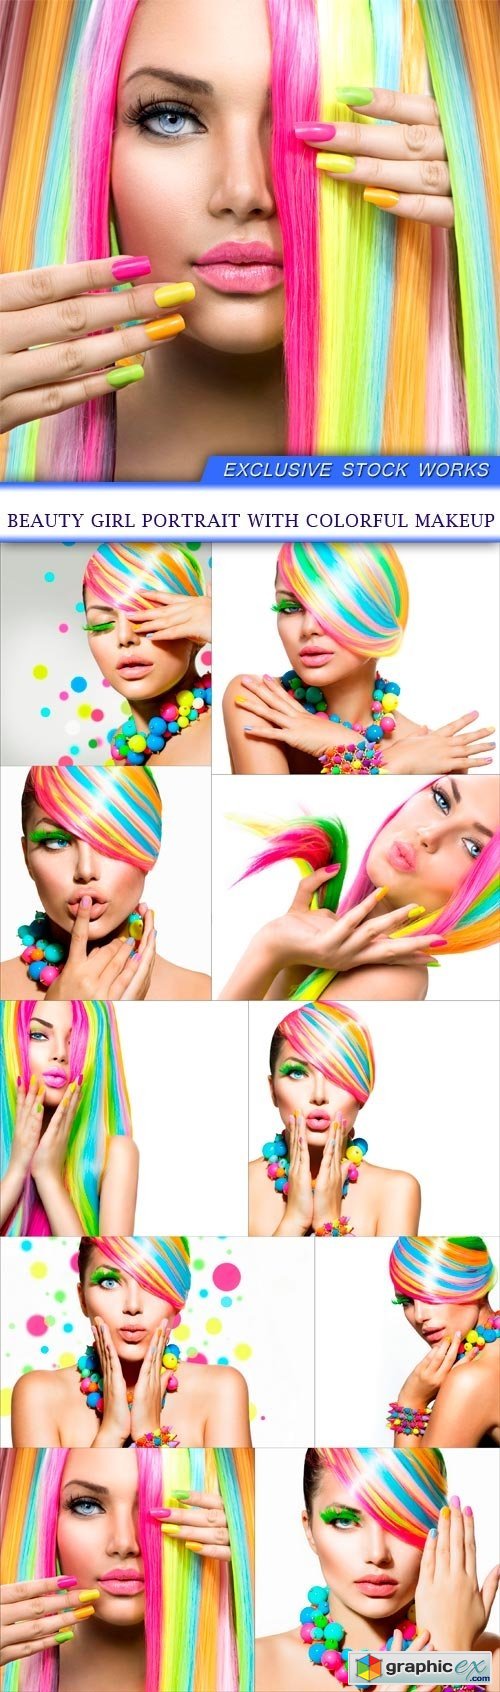 Beauty Girl Portrait with Colorful Makeup 10X JPEG